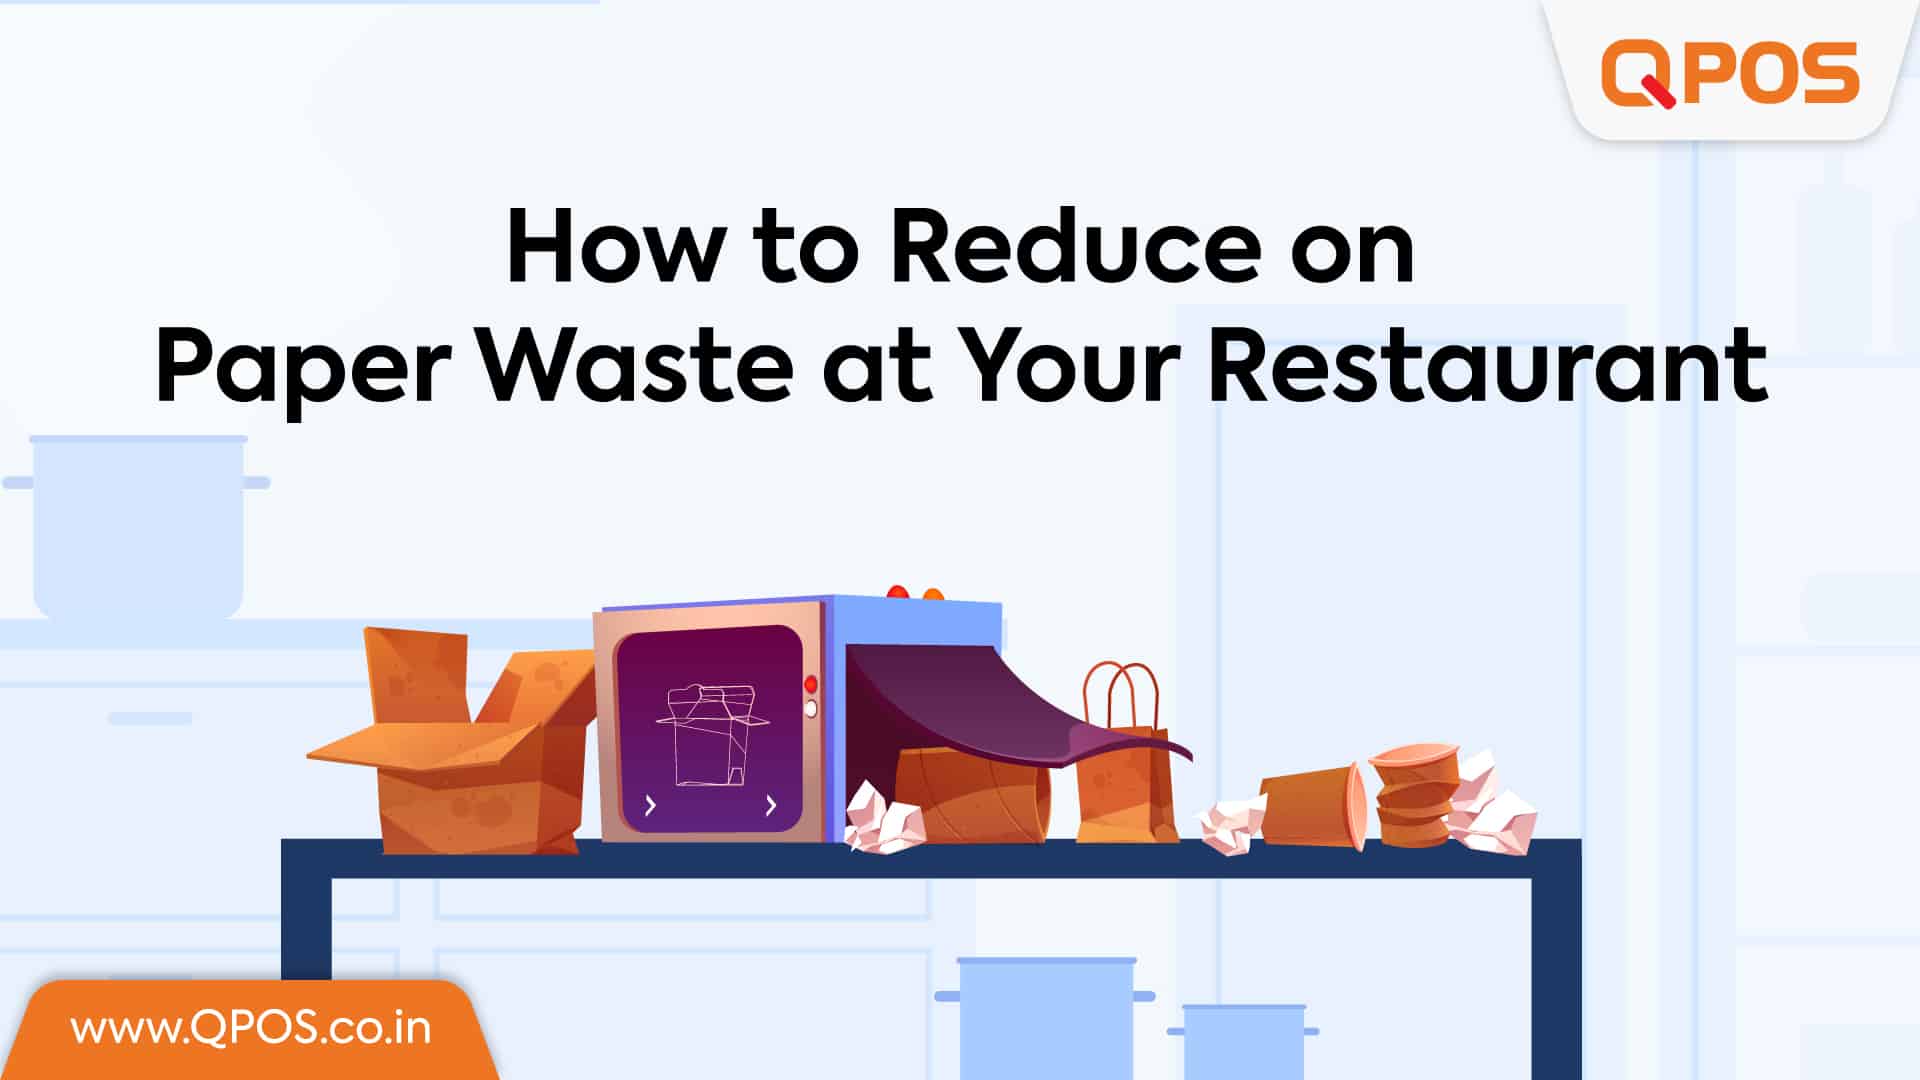 How to Reduce Paper Waste at Your Restaurant